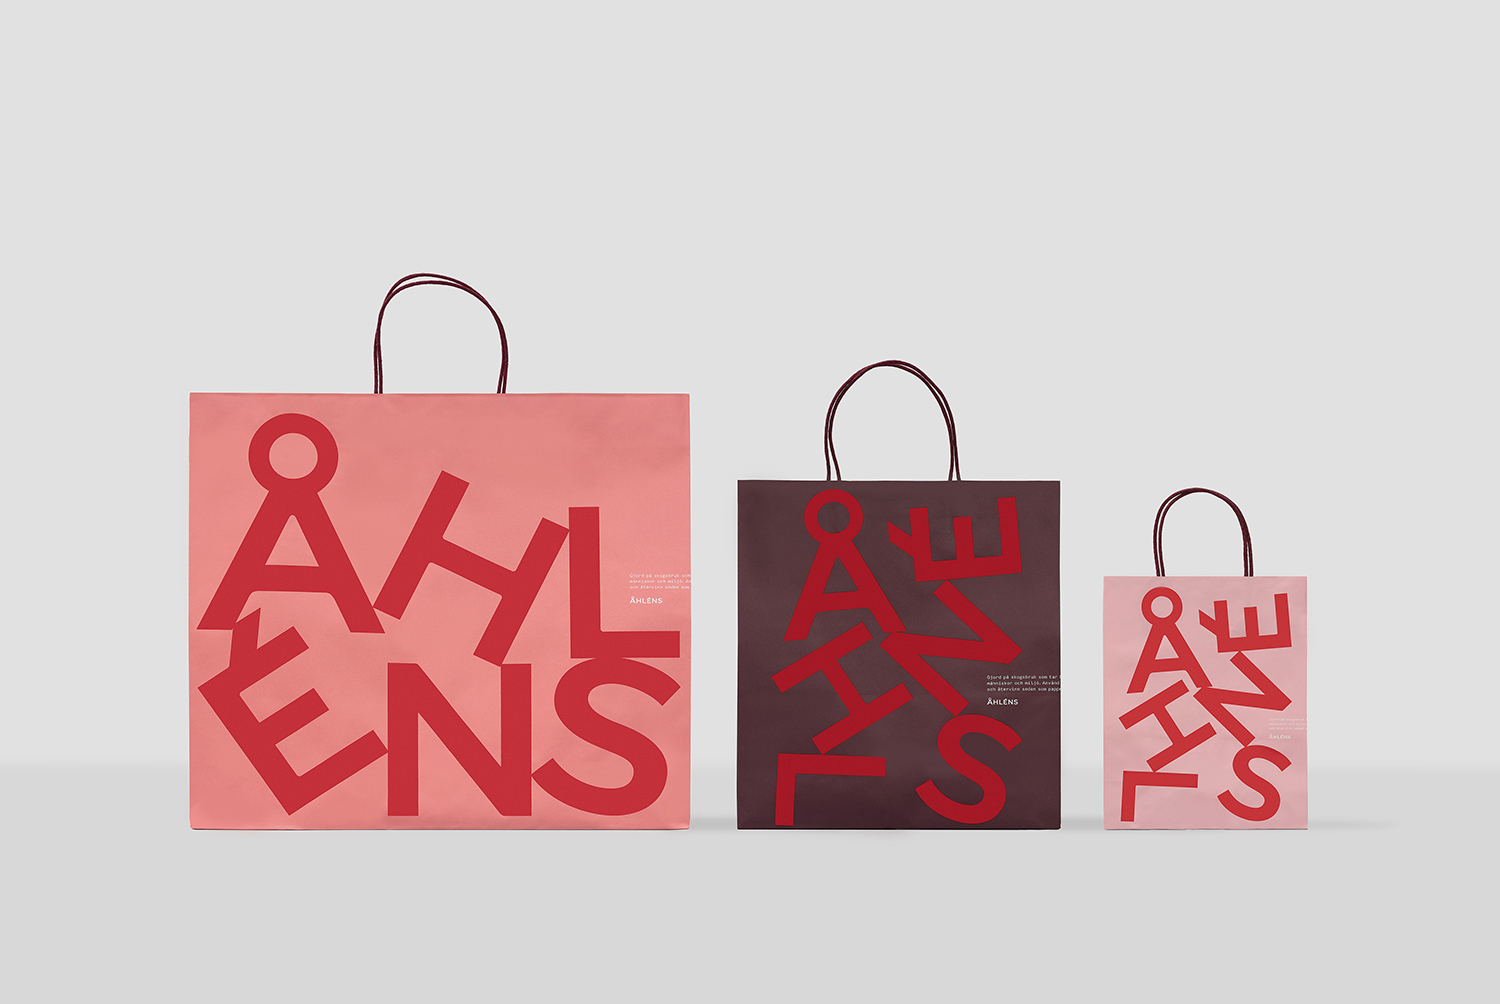 Visual identity, shopping bags, packaging and signage by Happy FB for Swedish retailer Åhléns